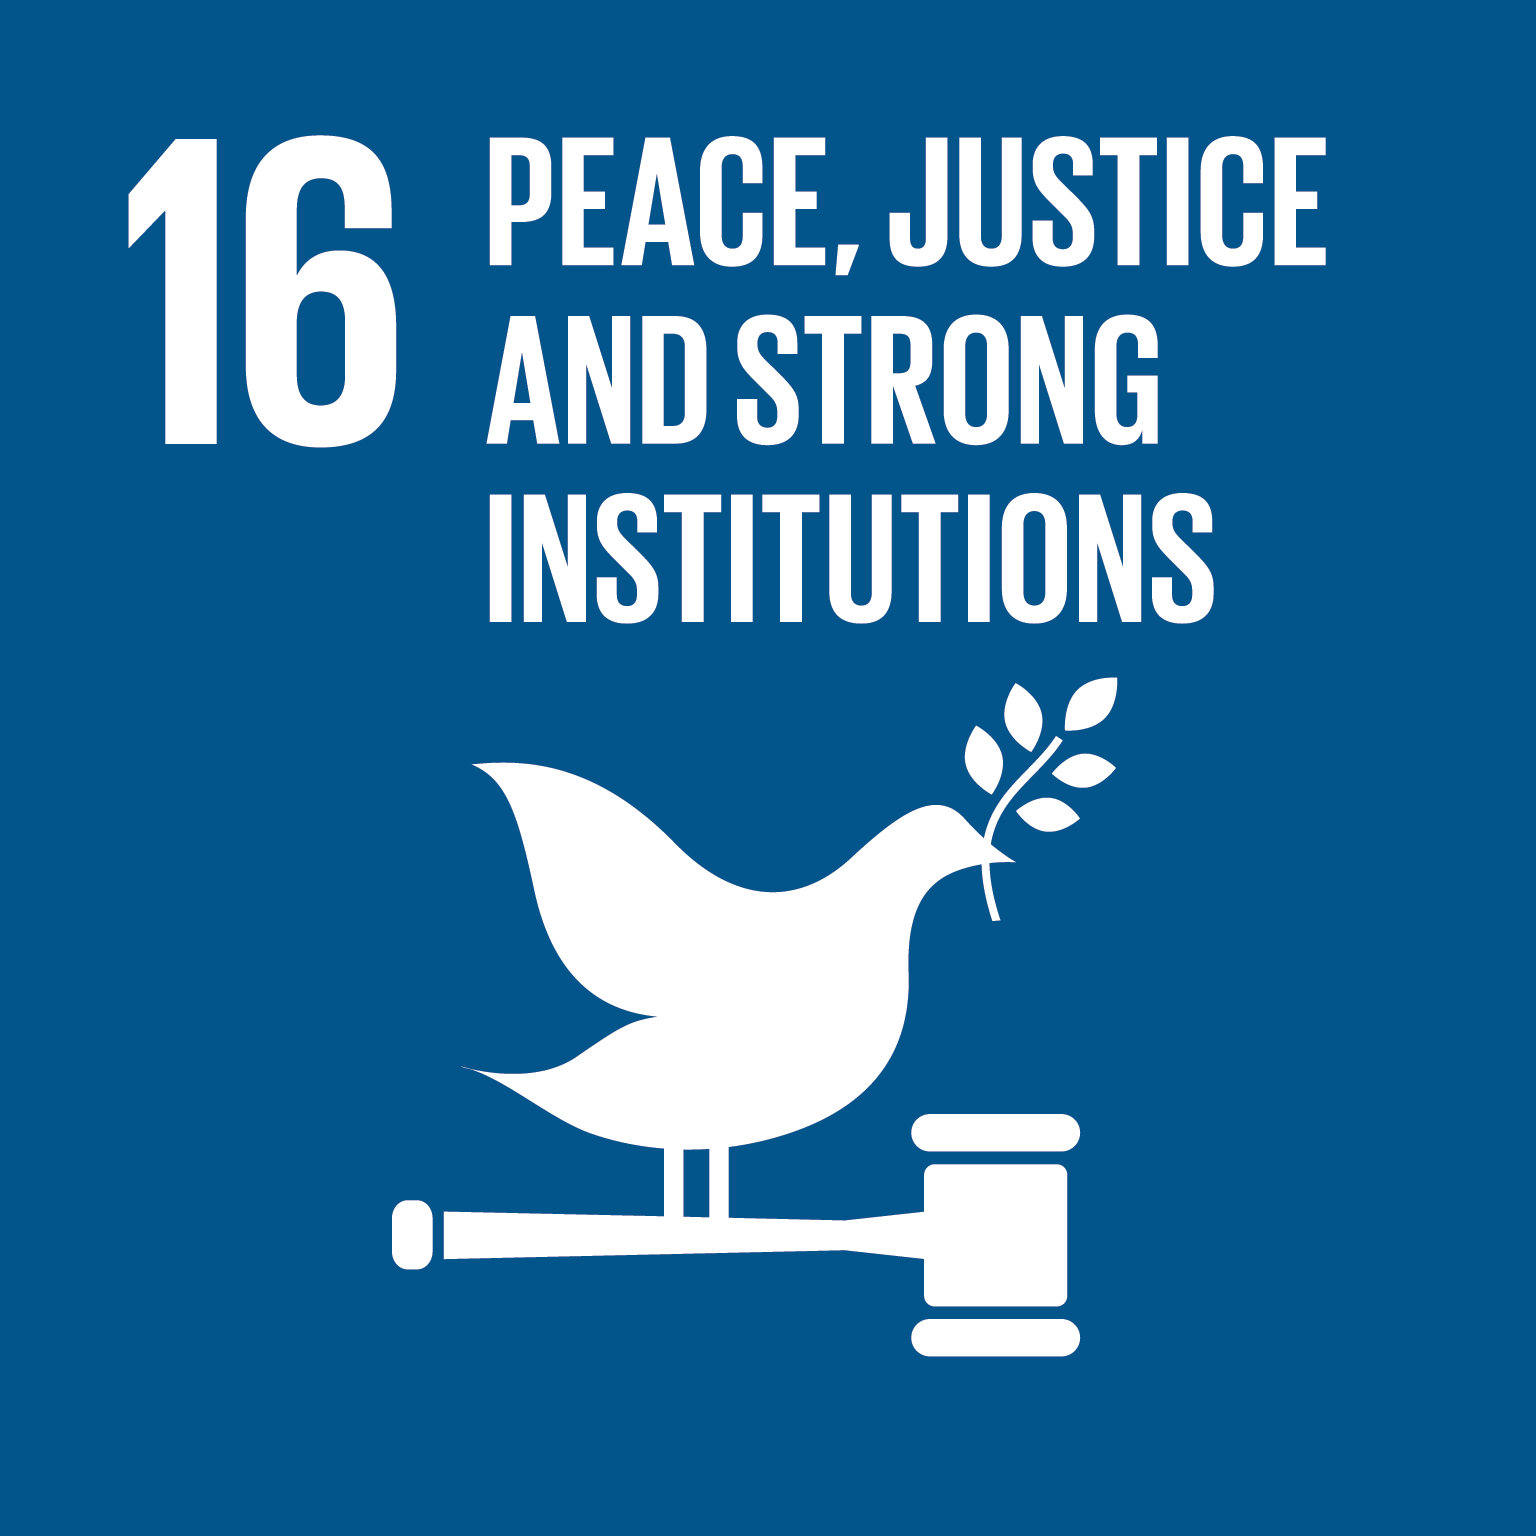 Goal 16: Peace, Justice, and Strong Institutions - Promote peaceful and inclusive societies for sustainable development, provide access to justice for all and build effective, accountable and inclusive institutions at all levels